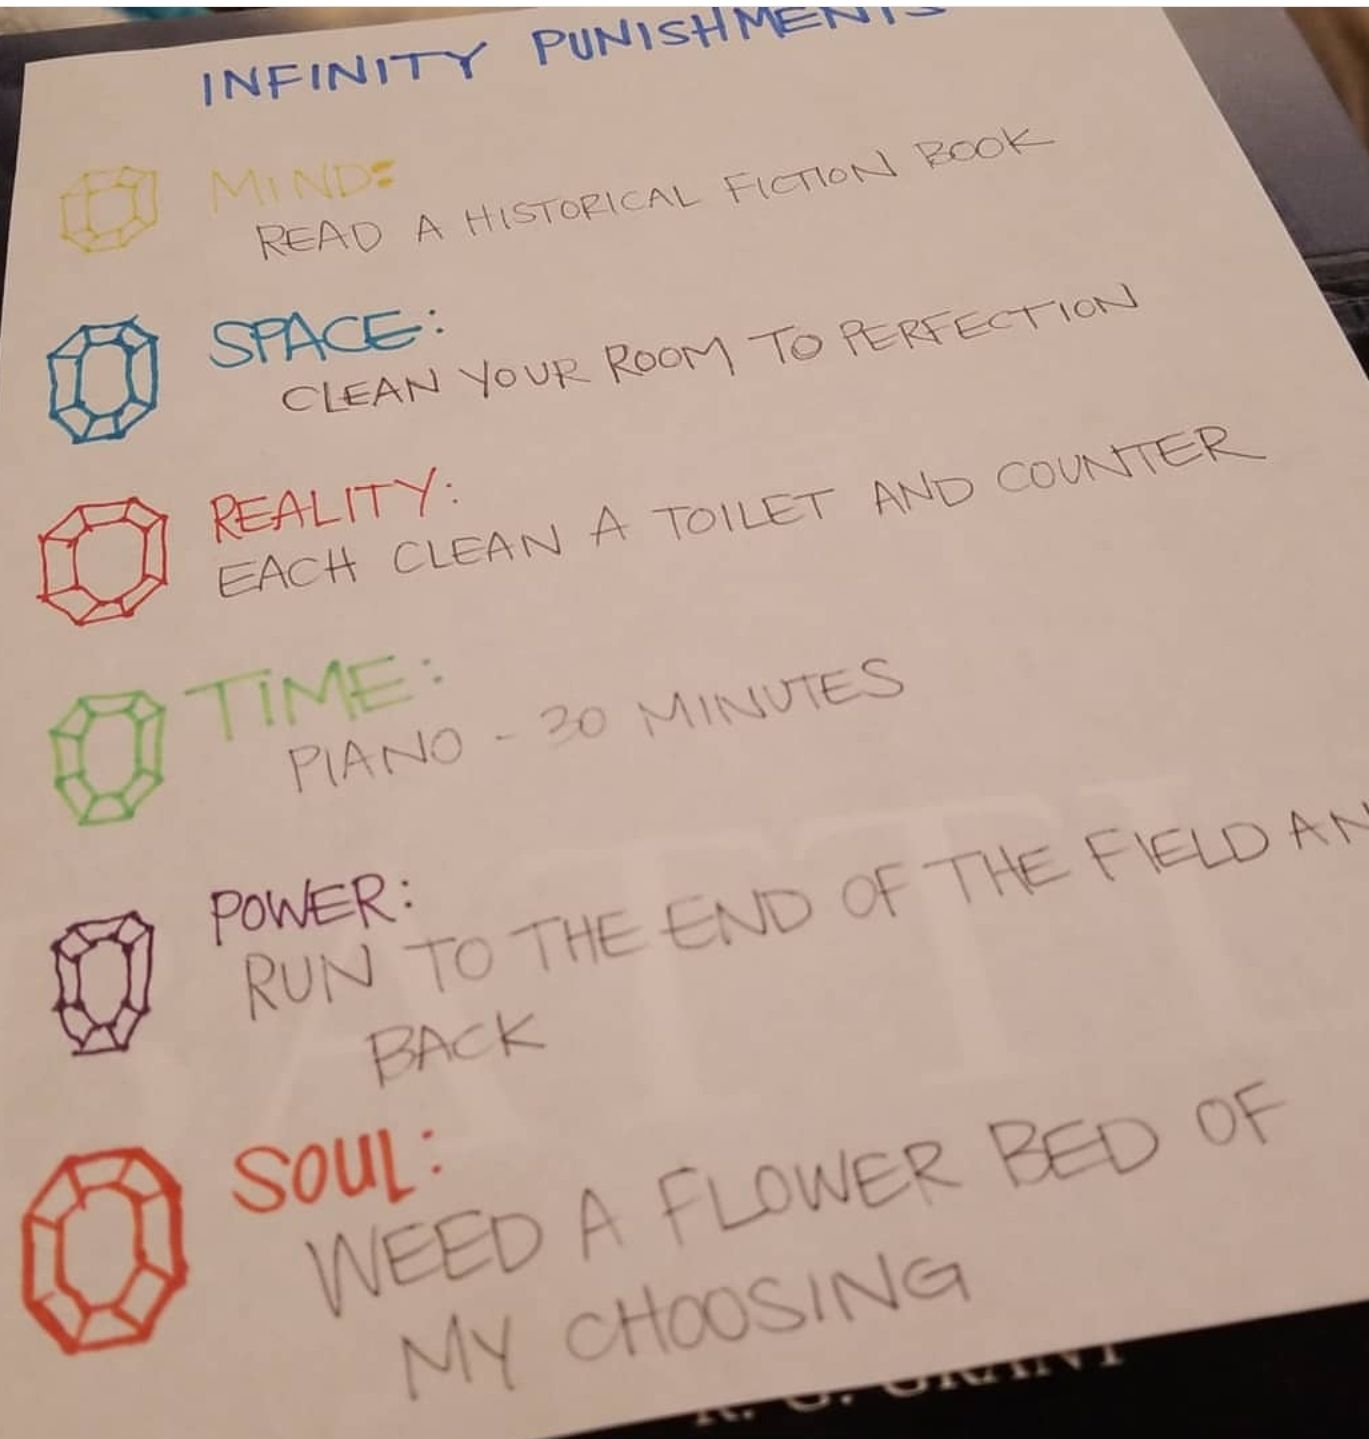 My kids spoiled Endgame. They received chores based on the infinity stones.